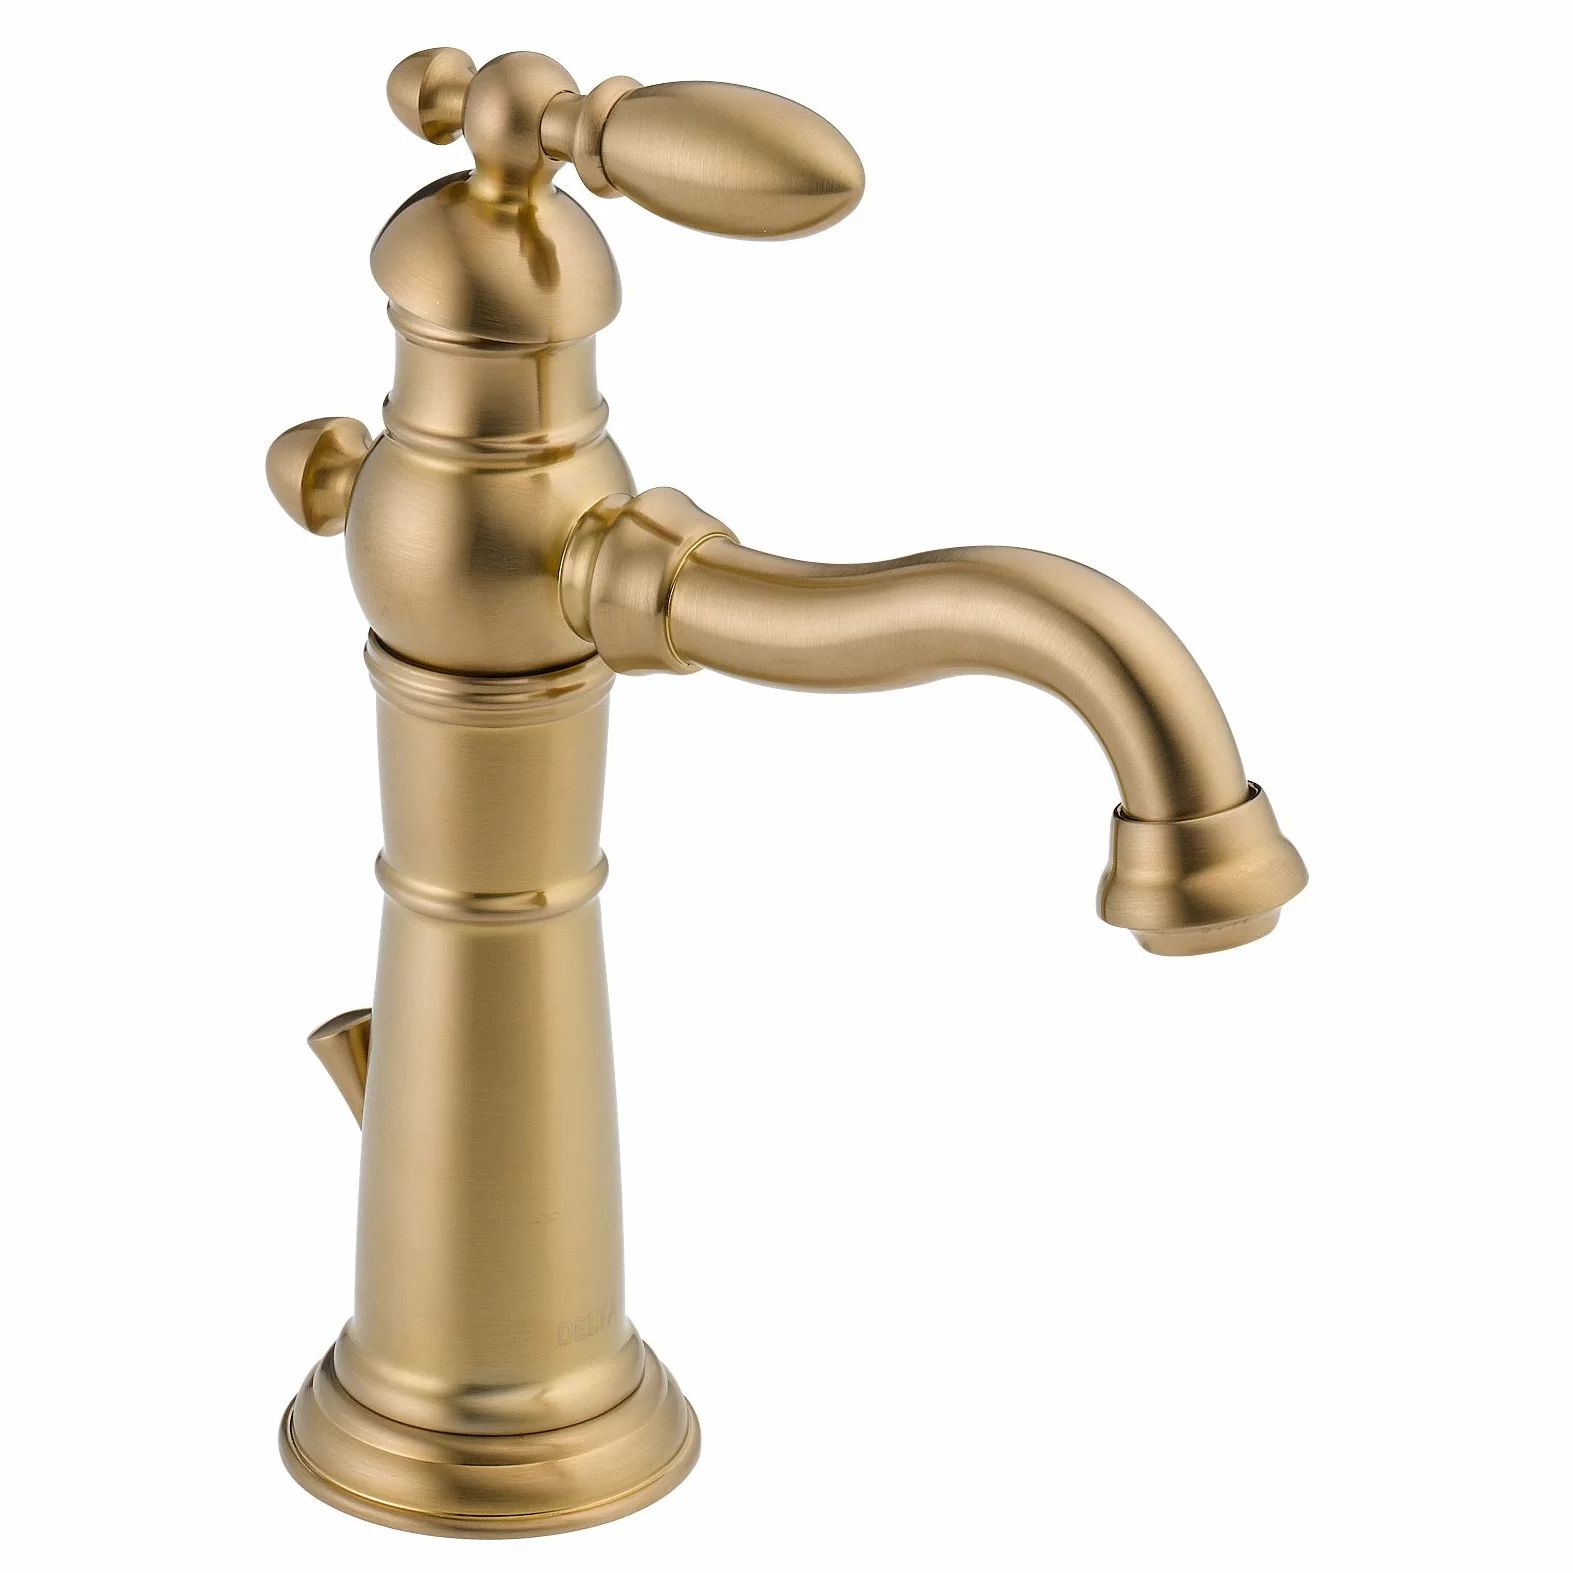 Victorian Single Hole Bathroom Faucet with Drain Assembly | Wayfair North America